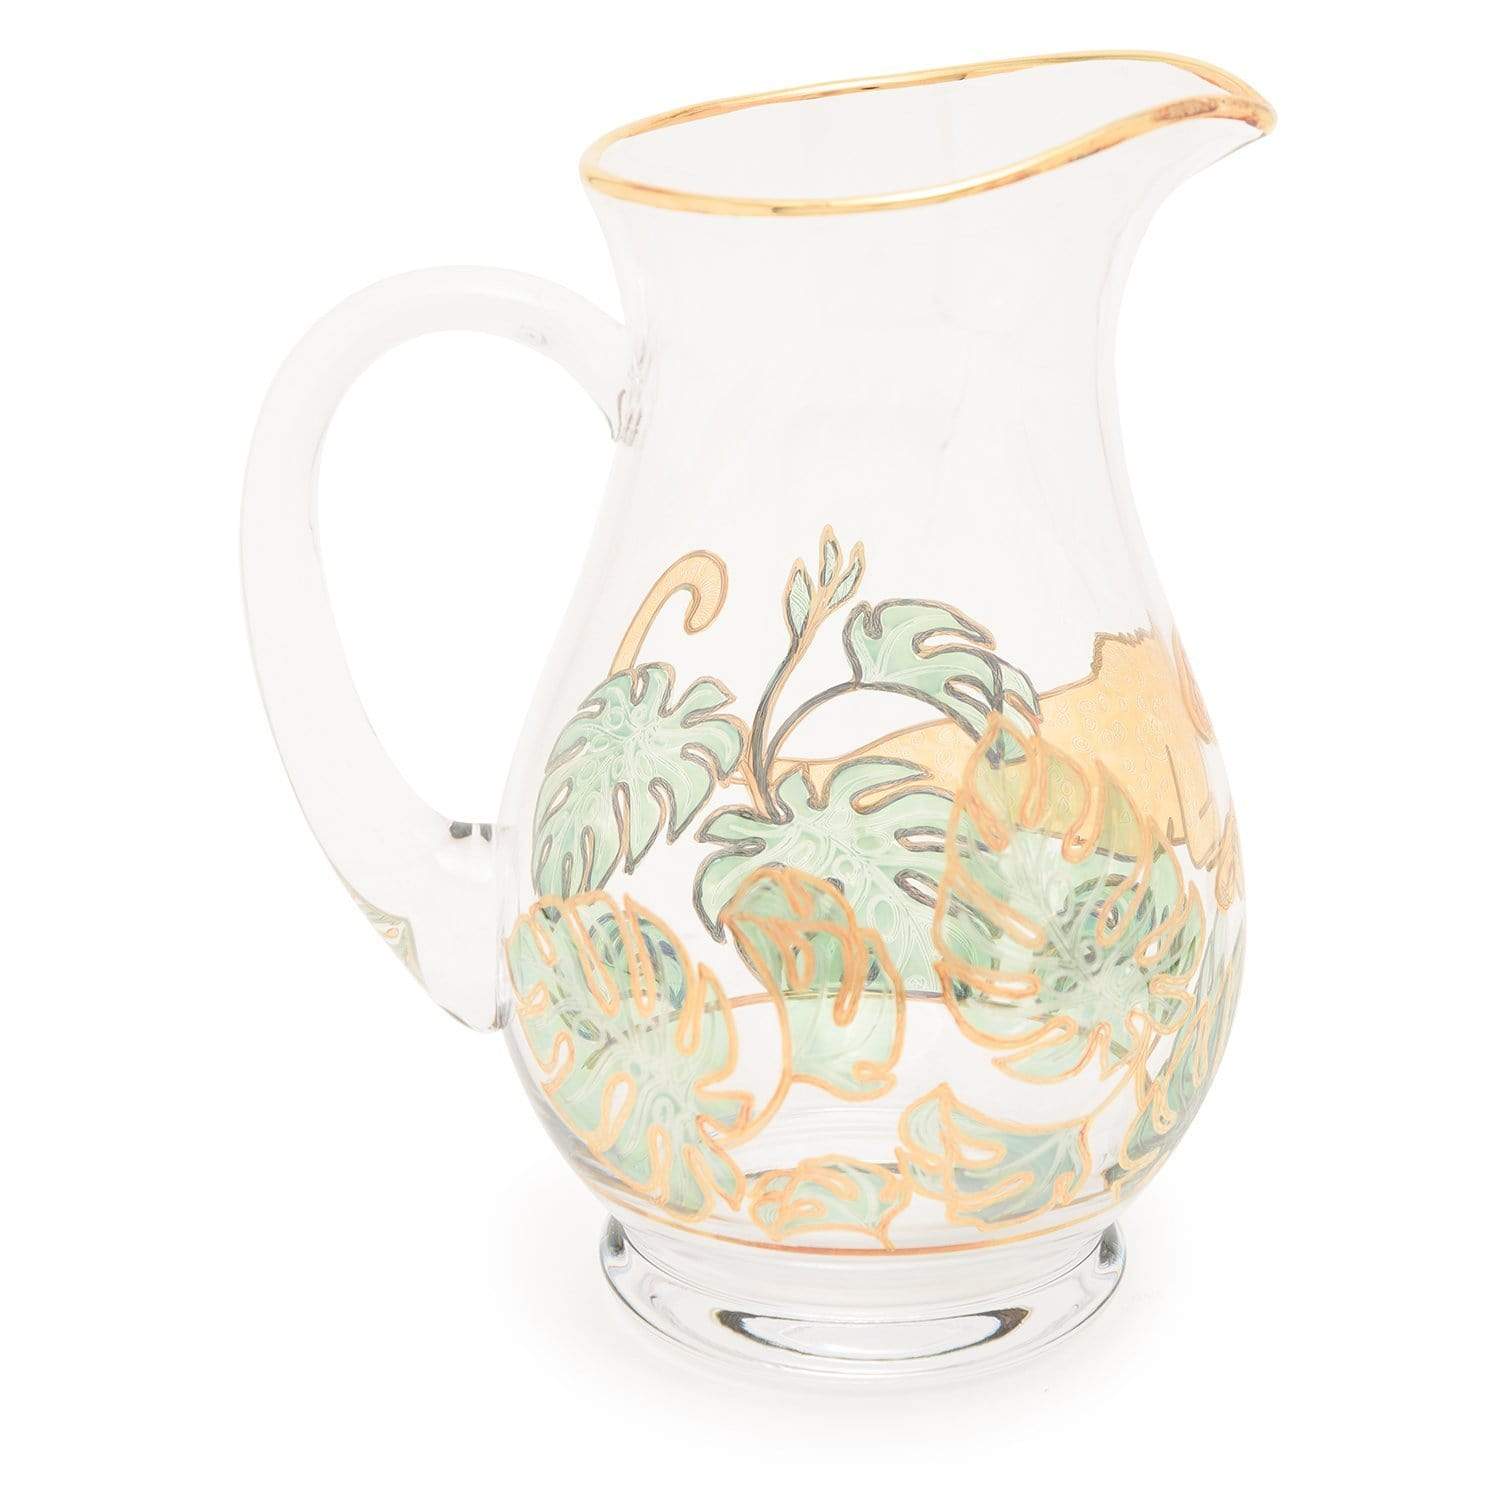 Combi Lesley Jug - Green and Gold, 38 cl - G748Z/38C - Jashanmal Home